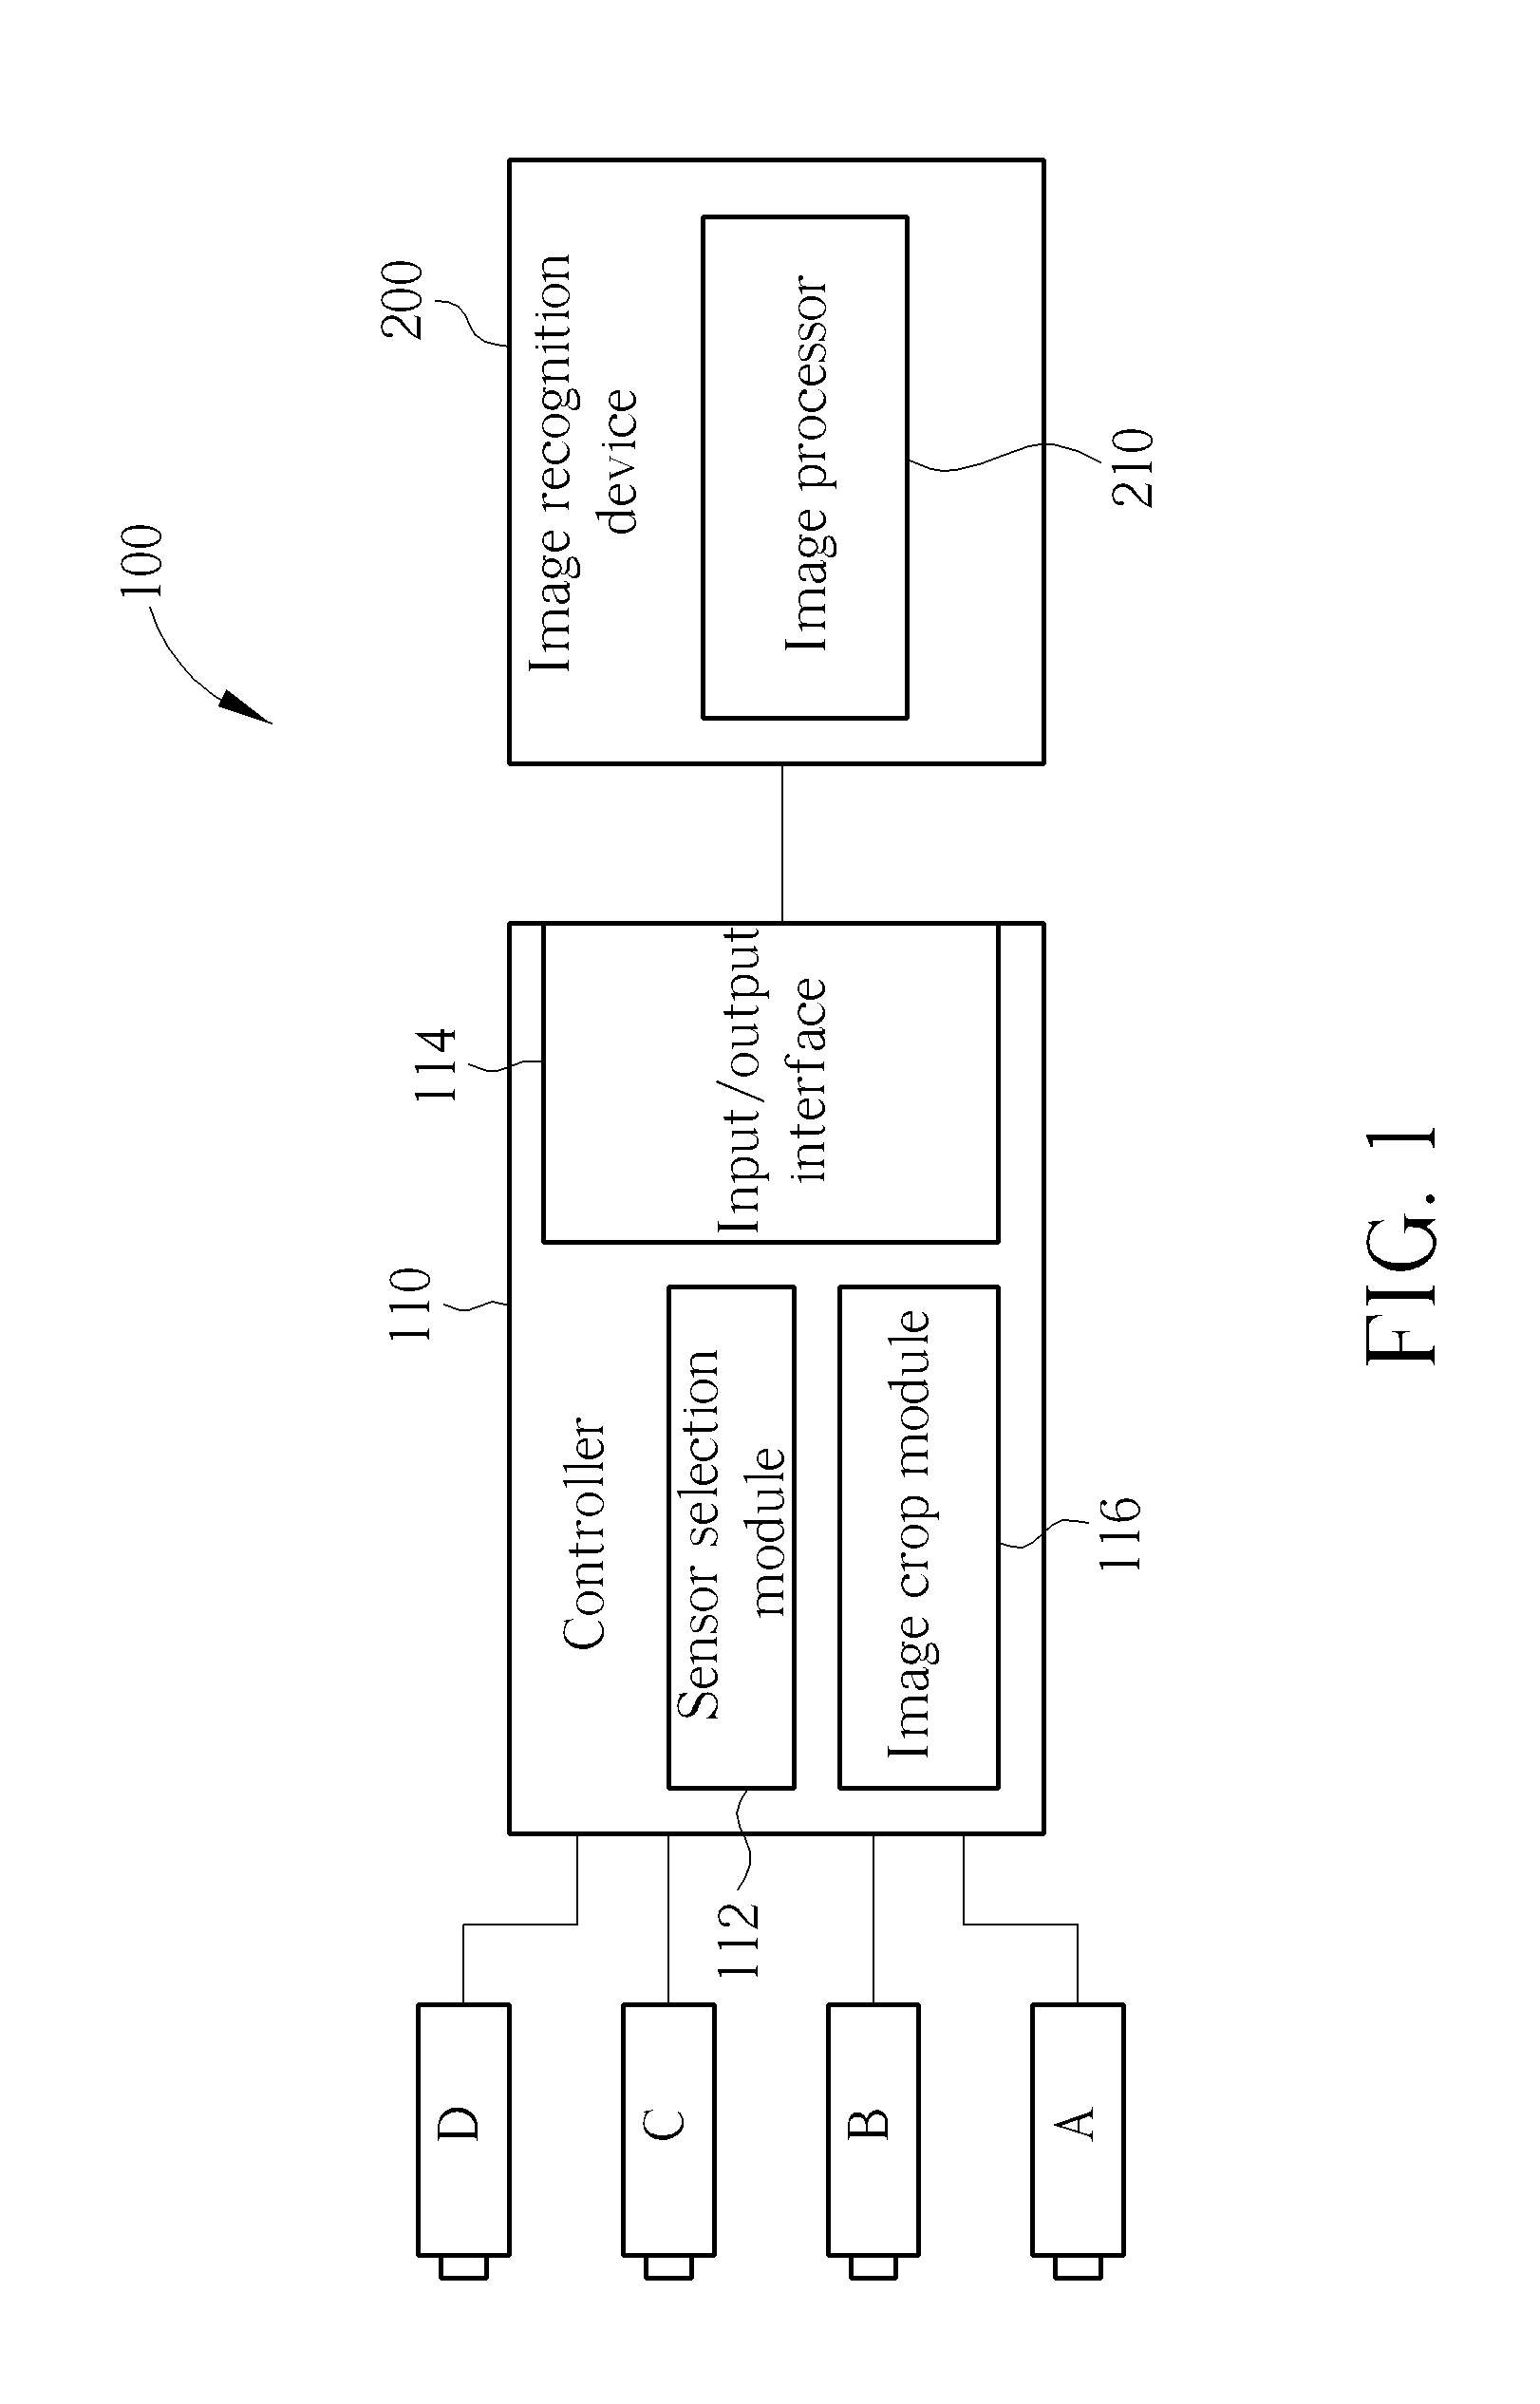 Image capturing method for image recognition and system thereof